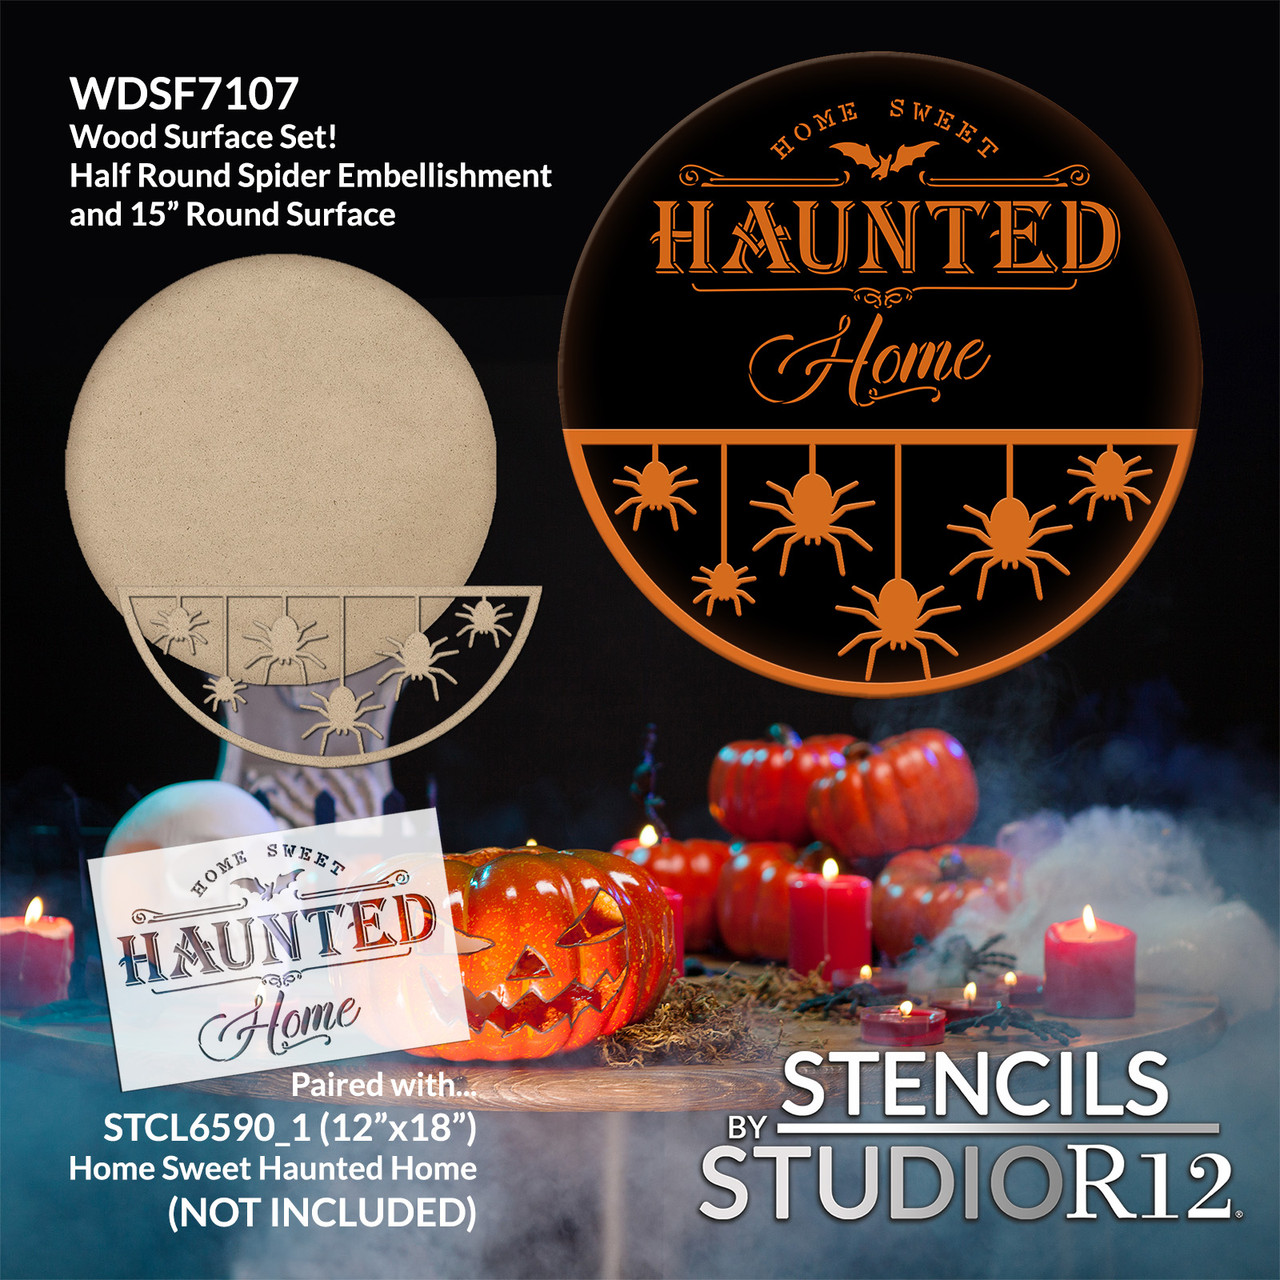 Hanging Spiders Half Round Wood Embellishment Set - 1/4" MDF - 15" Halloween Door Hanger Sign - DIY Spooky Fall Decor - Ready to Paint Wood Surface - WDSF7107